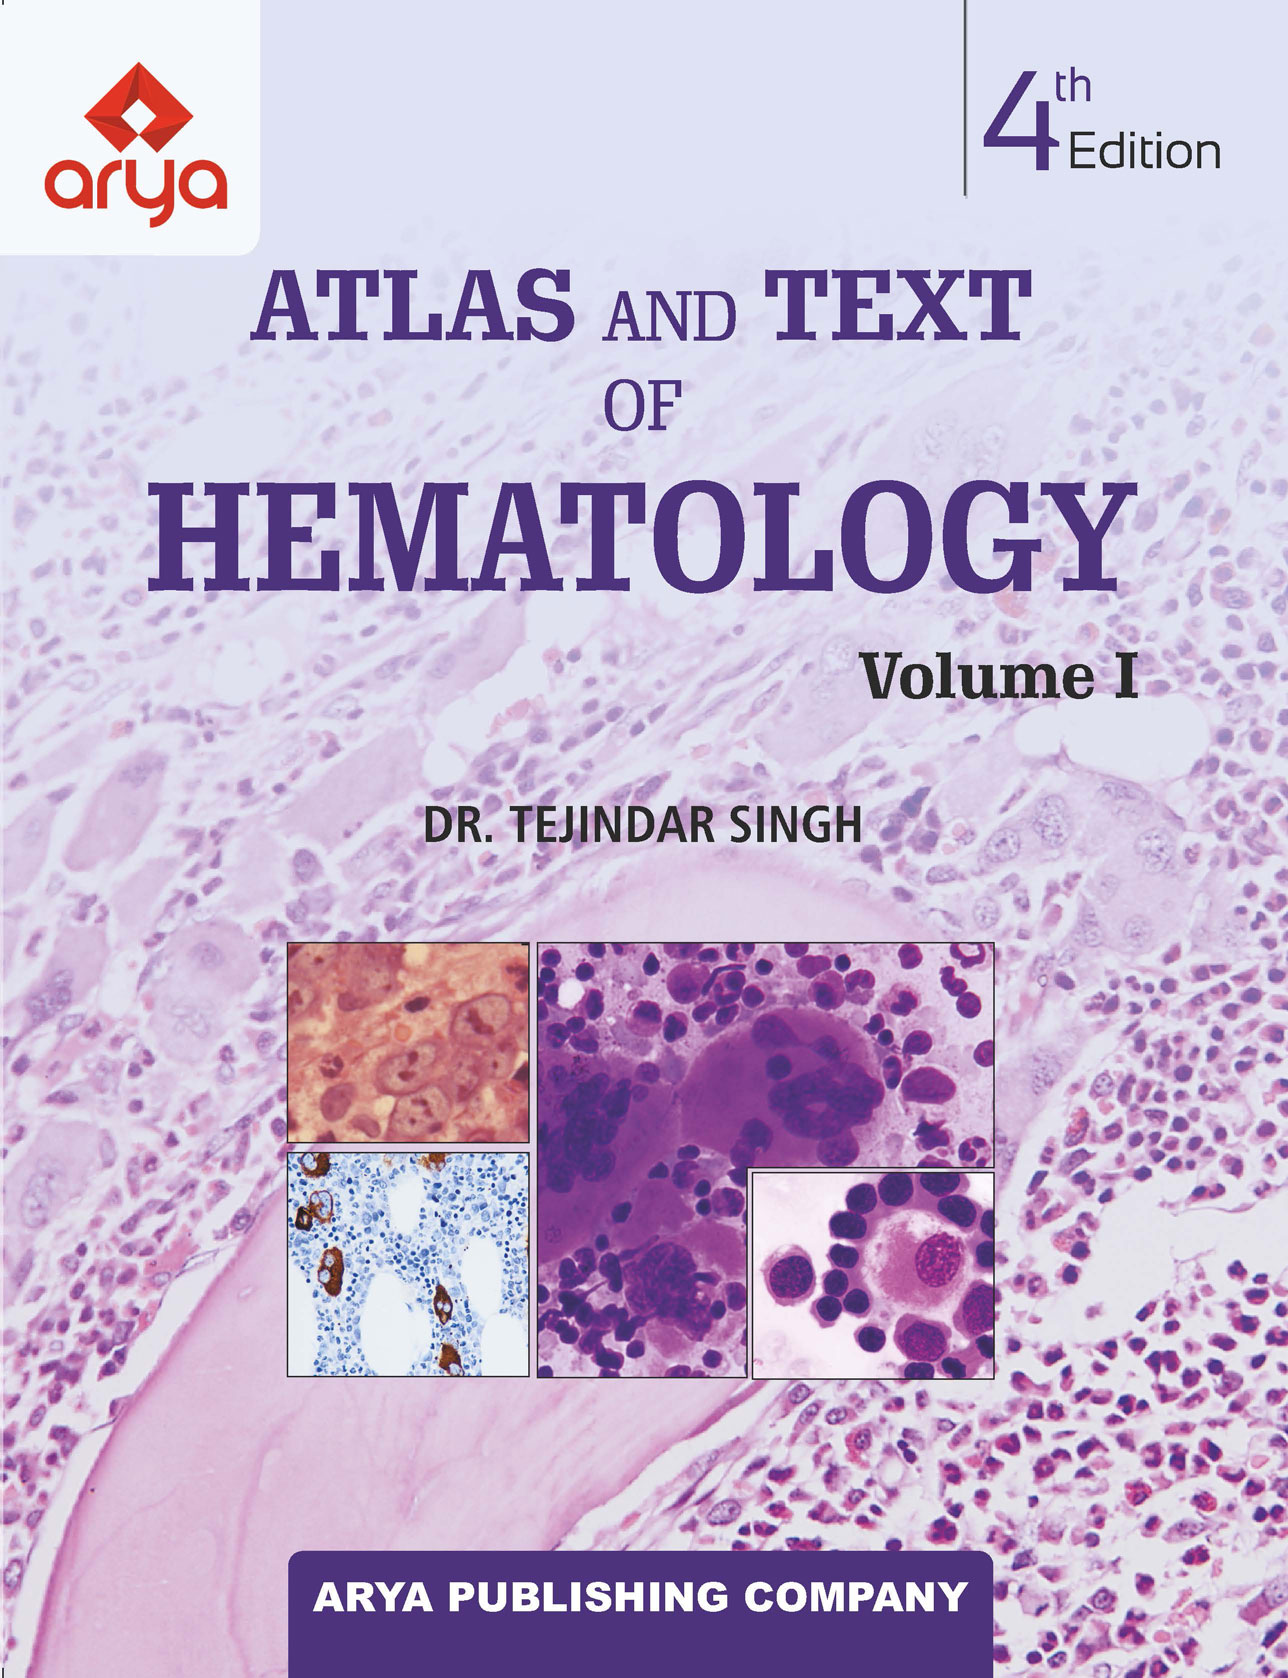 Atlas and Text of Hematology (Volume I and II )